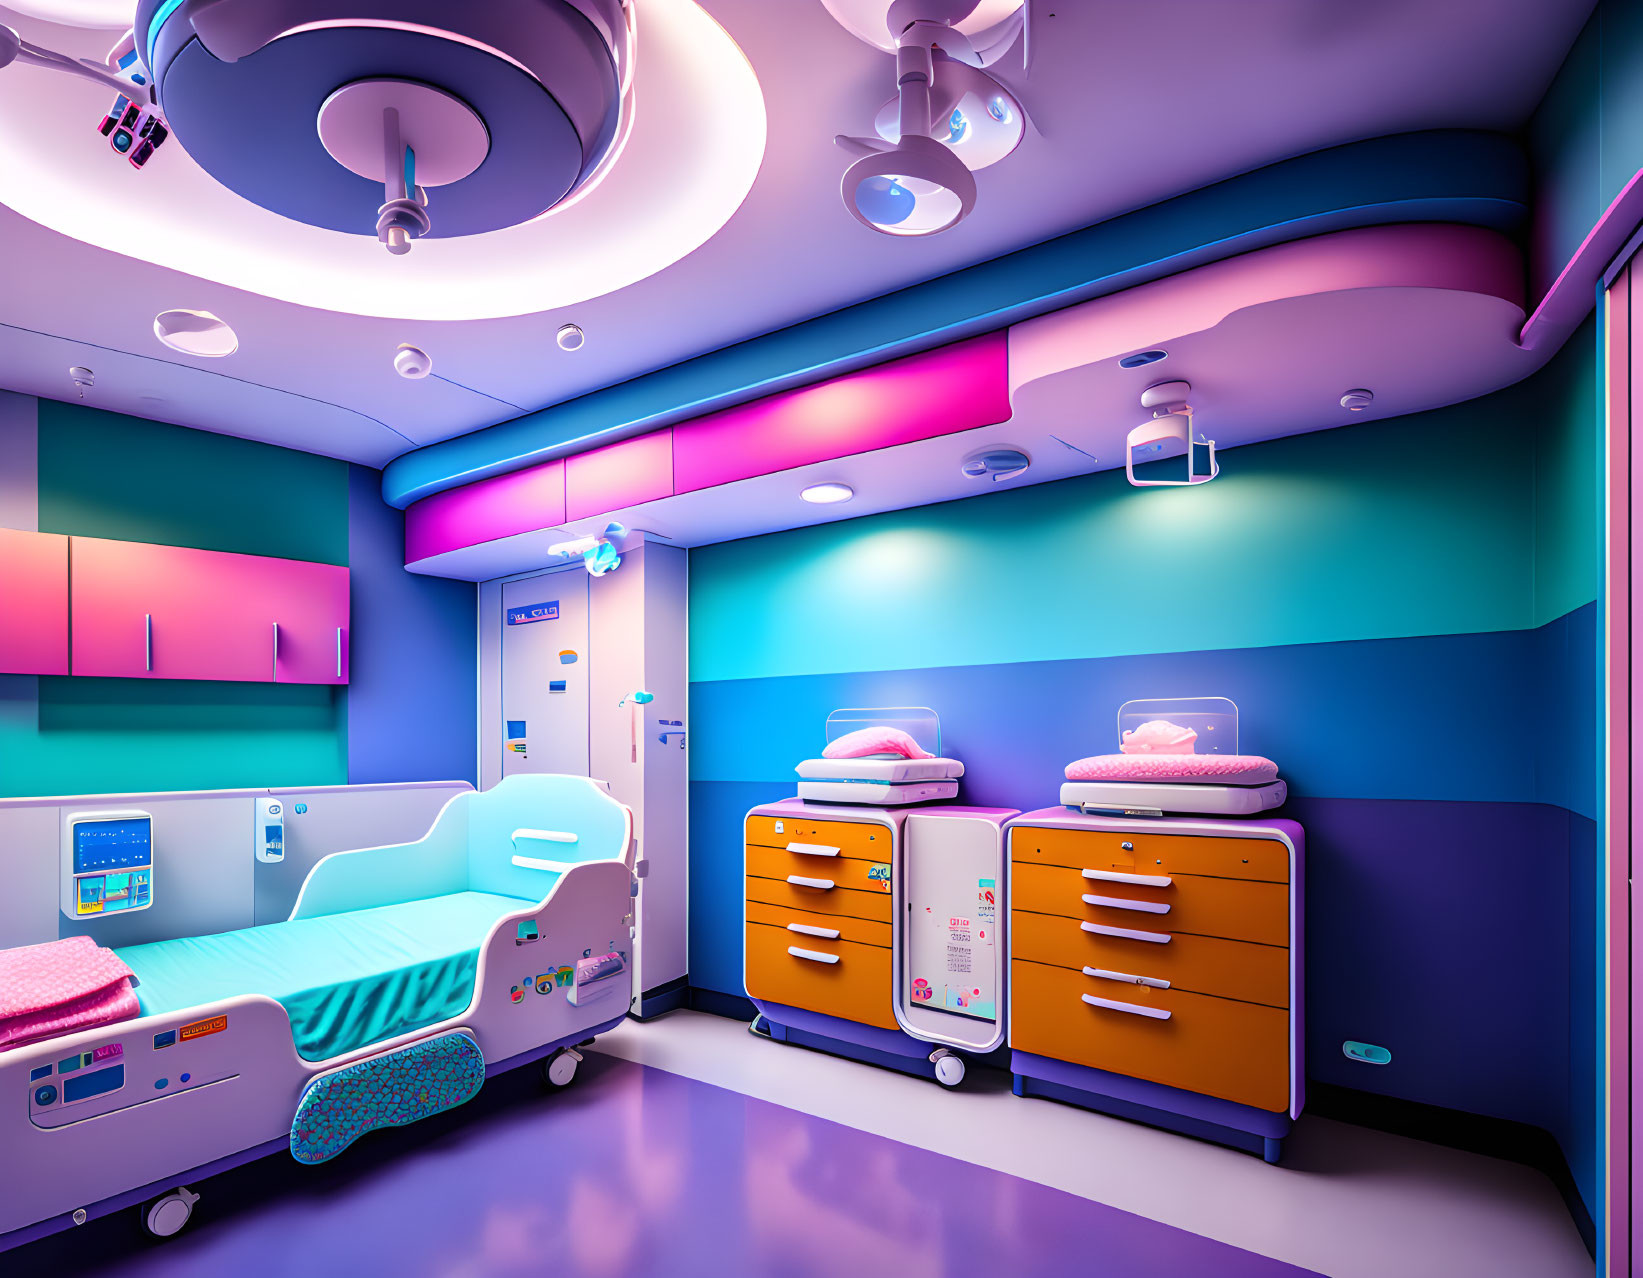 Vibrant children's hospital room with modern equipment and child-friendly decor